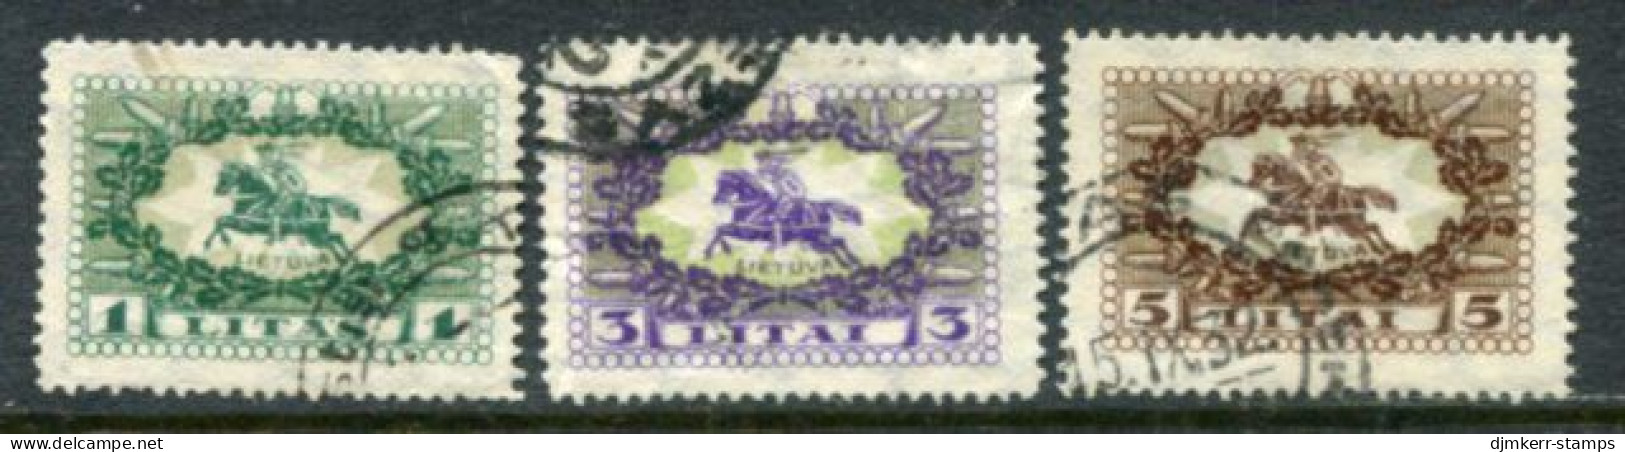 LITHUANIA 1927 Vytis  Definitive Used. Michel 278-80 - Lituanie